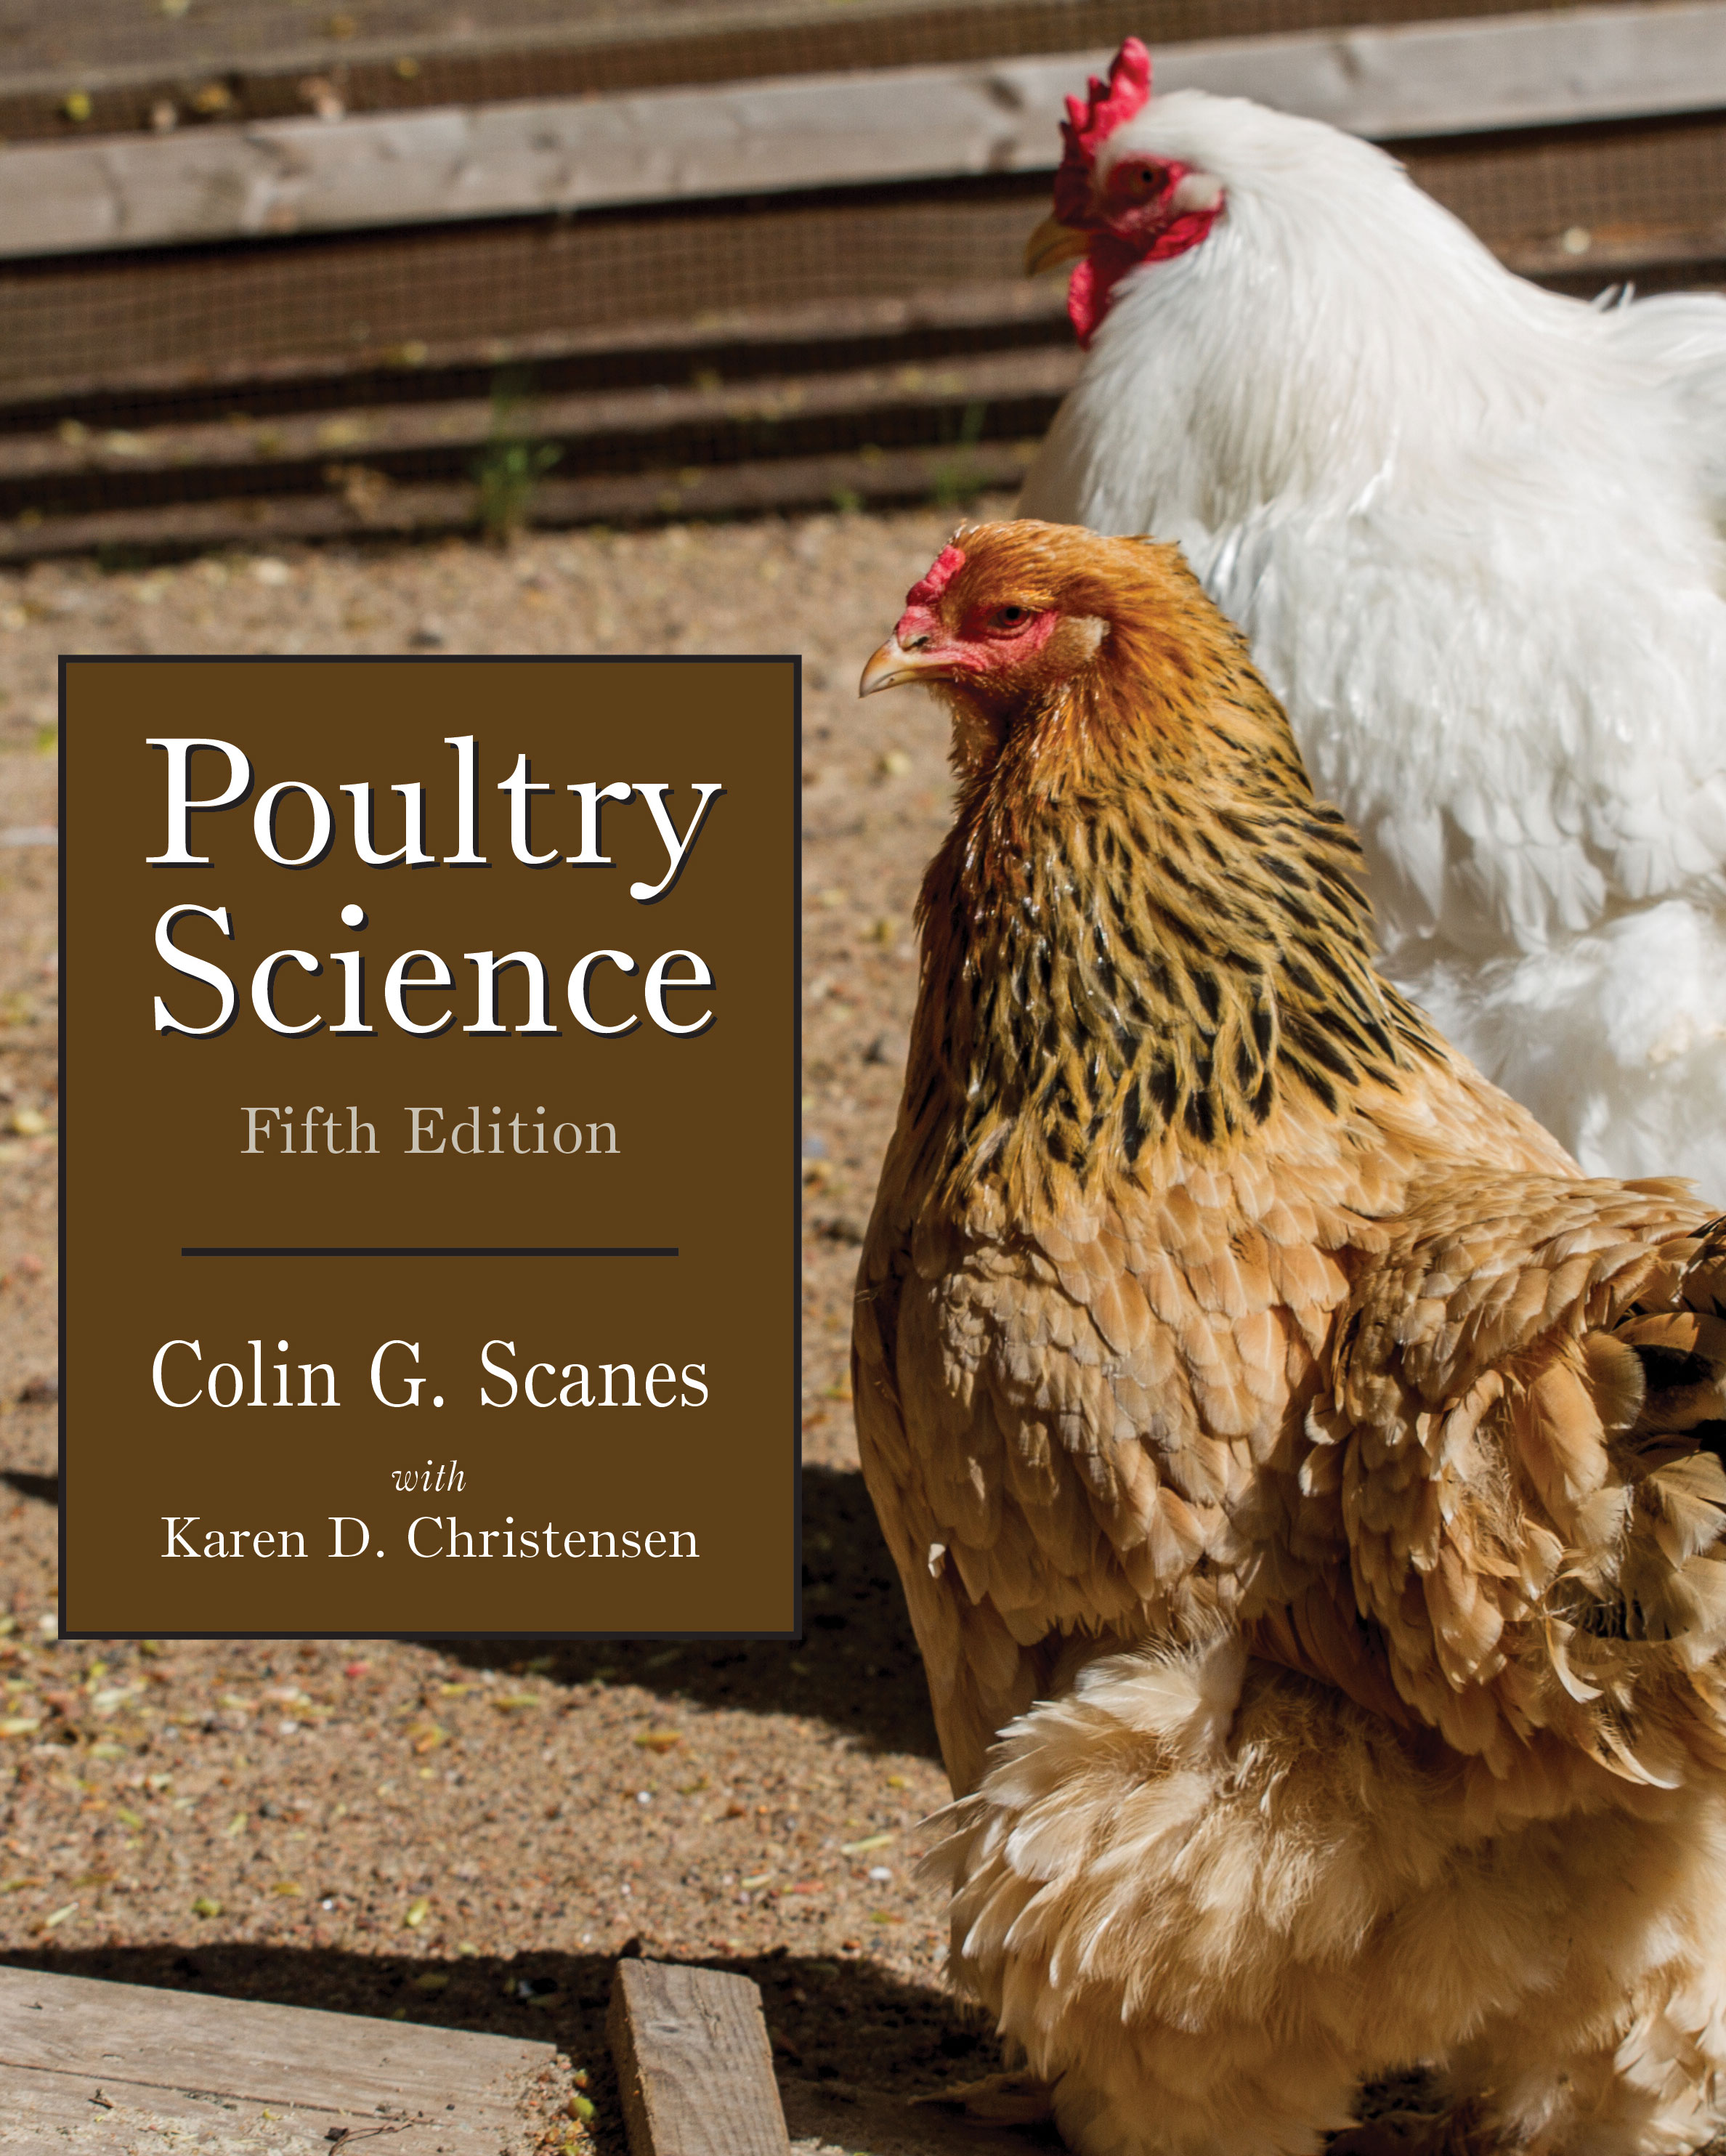 Poultry Science: Fifth Edition by Colin G. Scanes with Karen D. Christensen